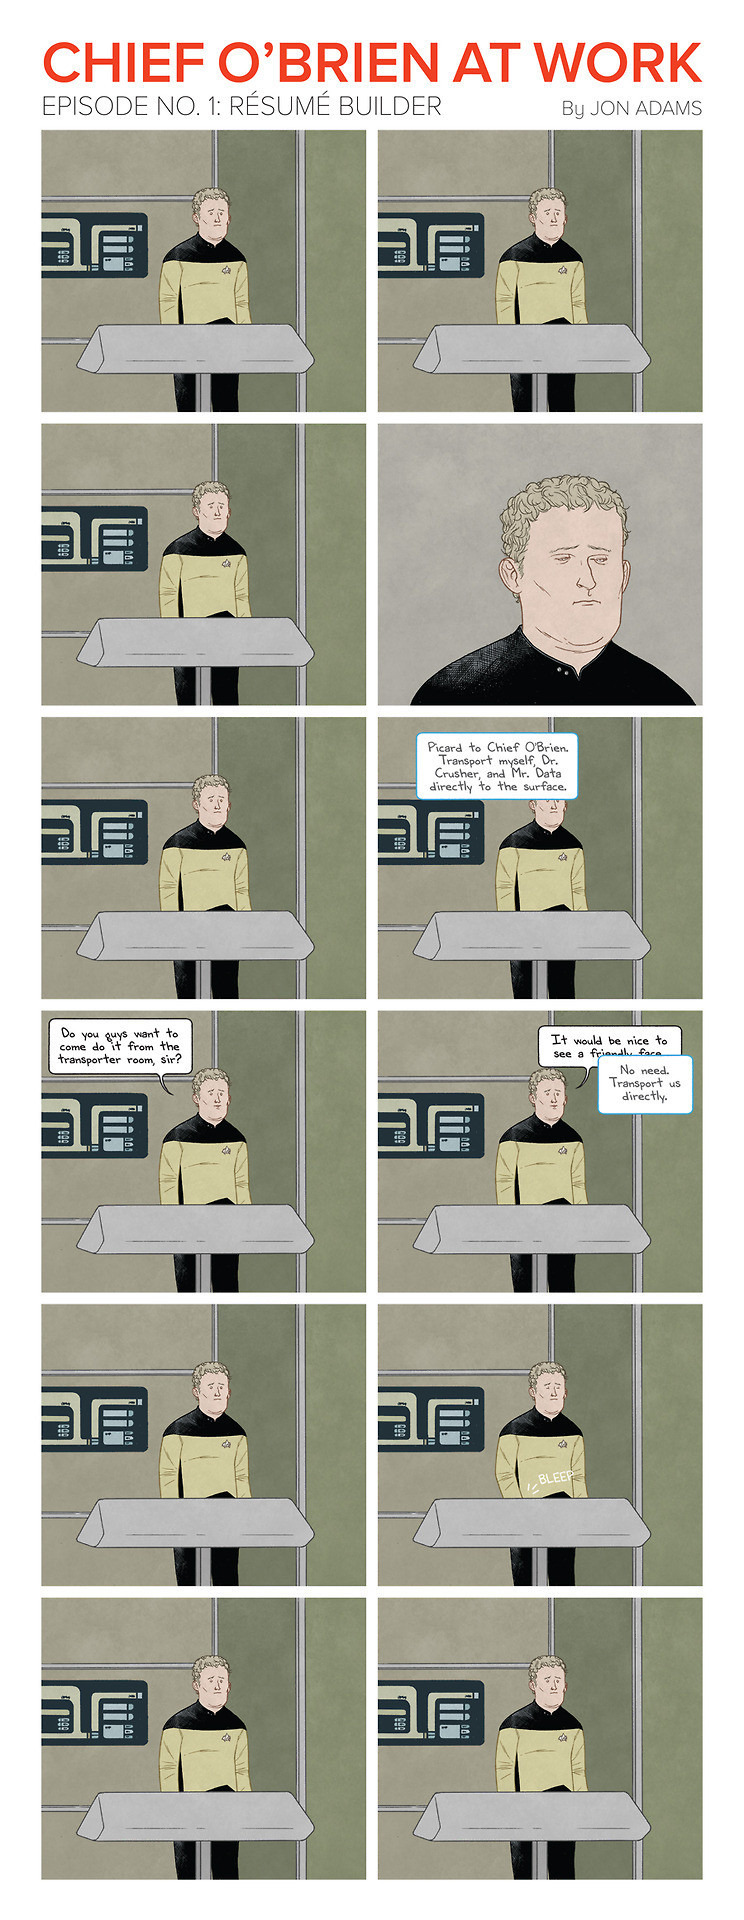 Star Trek Fanfic Comic About Chief O'Brien Hits The Spot